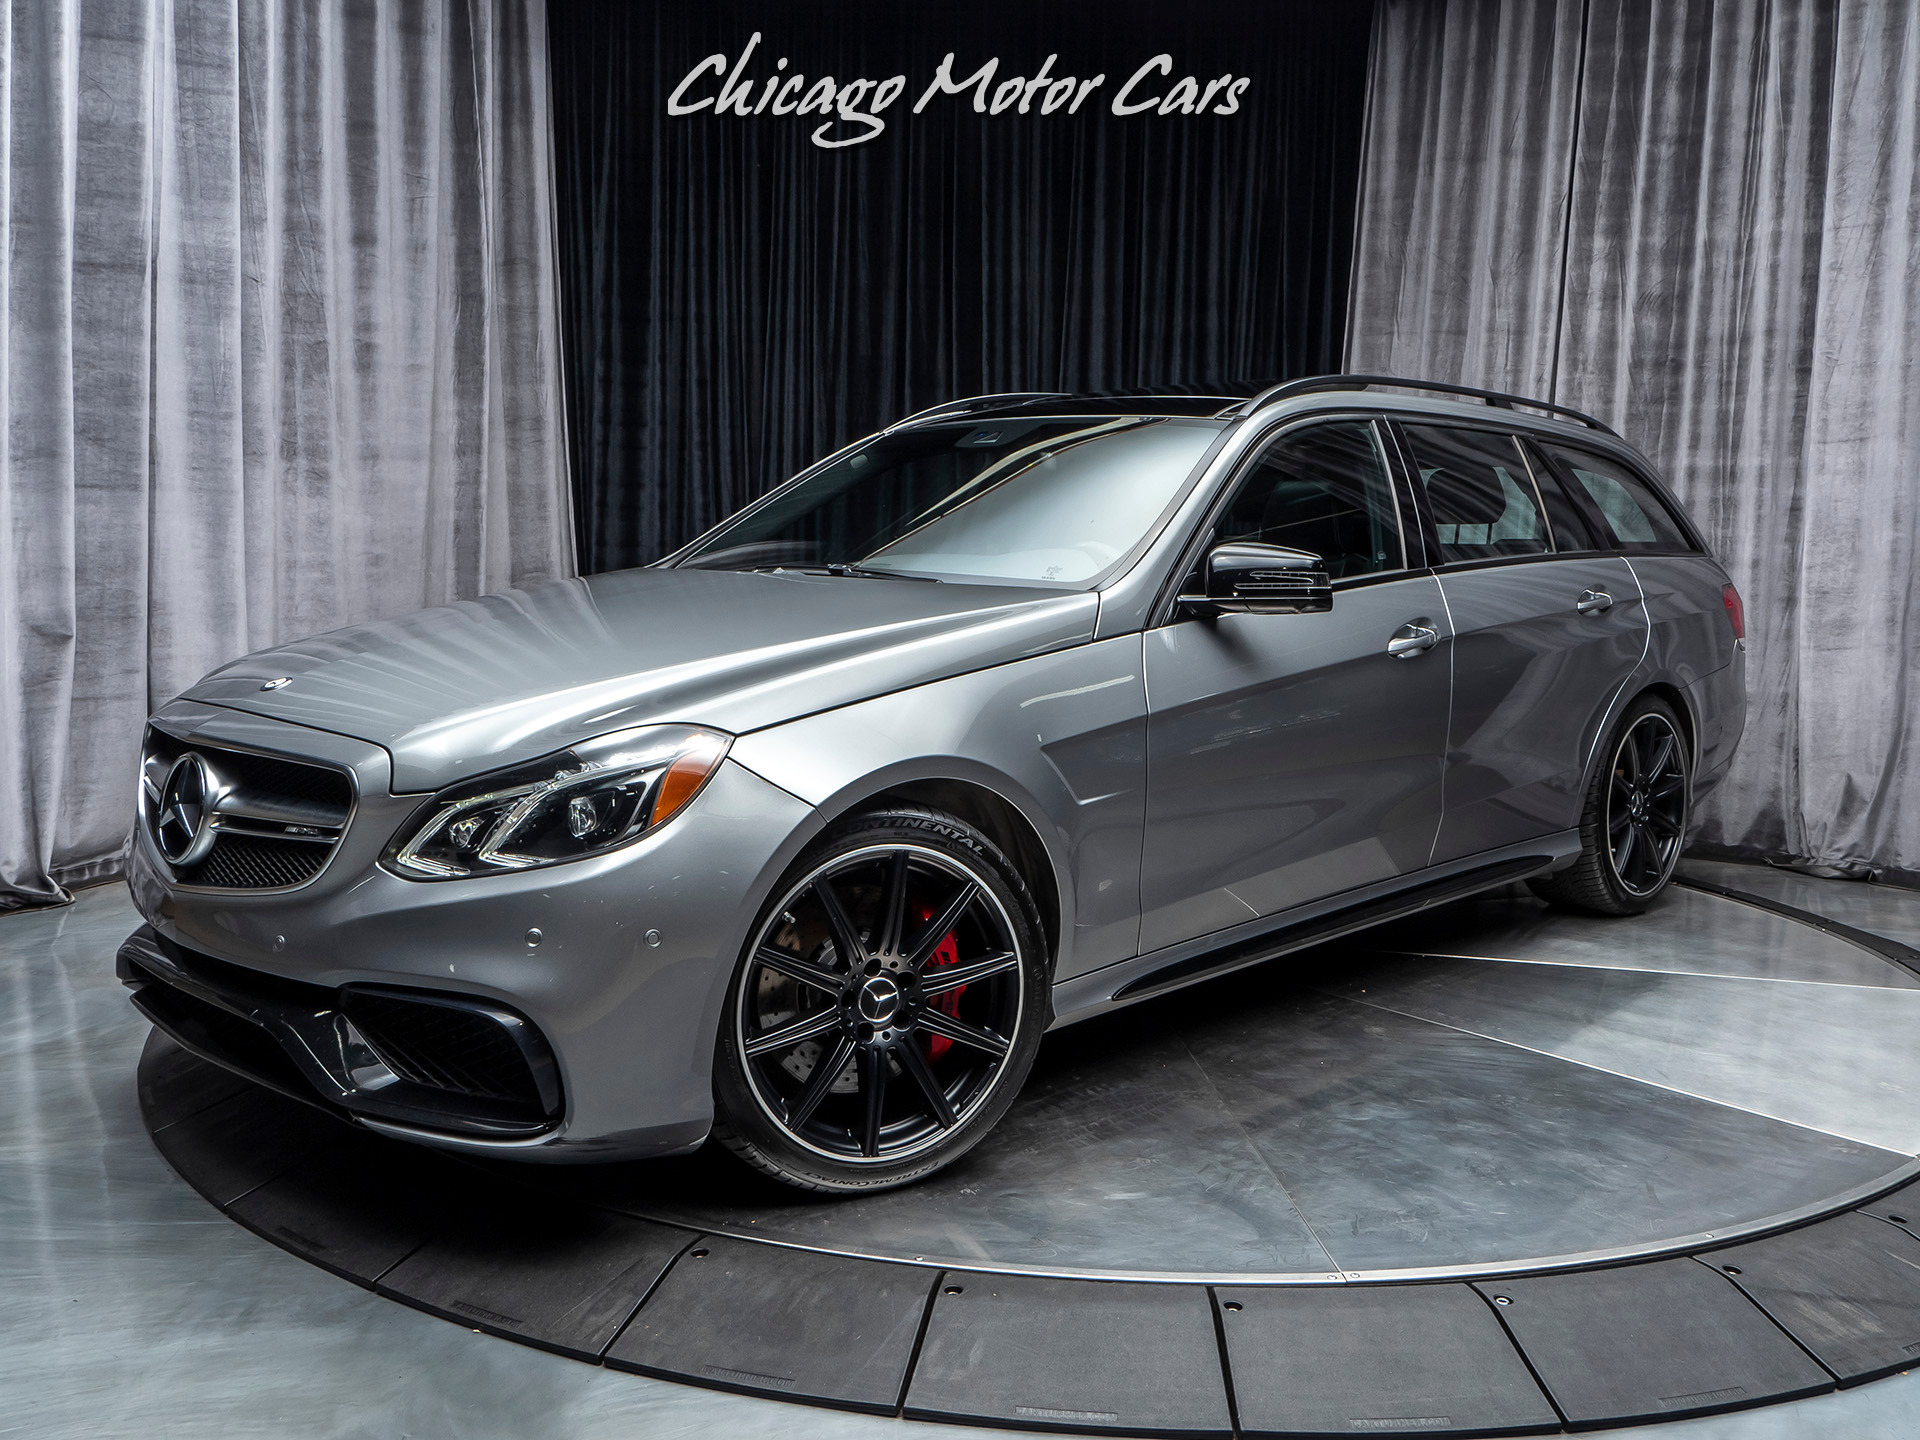 Used 2015 Mercedes Benz E 63 Amg 4matic Wagon For Sale Special Pricing Chicago Motor Cars Stock 15972